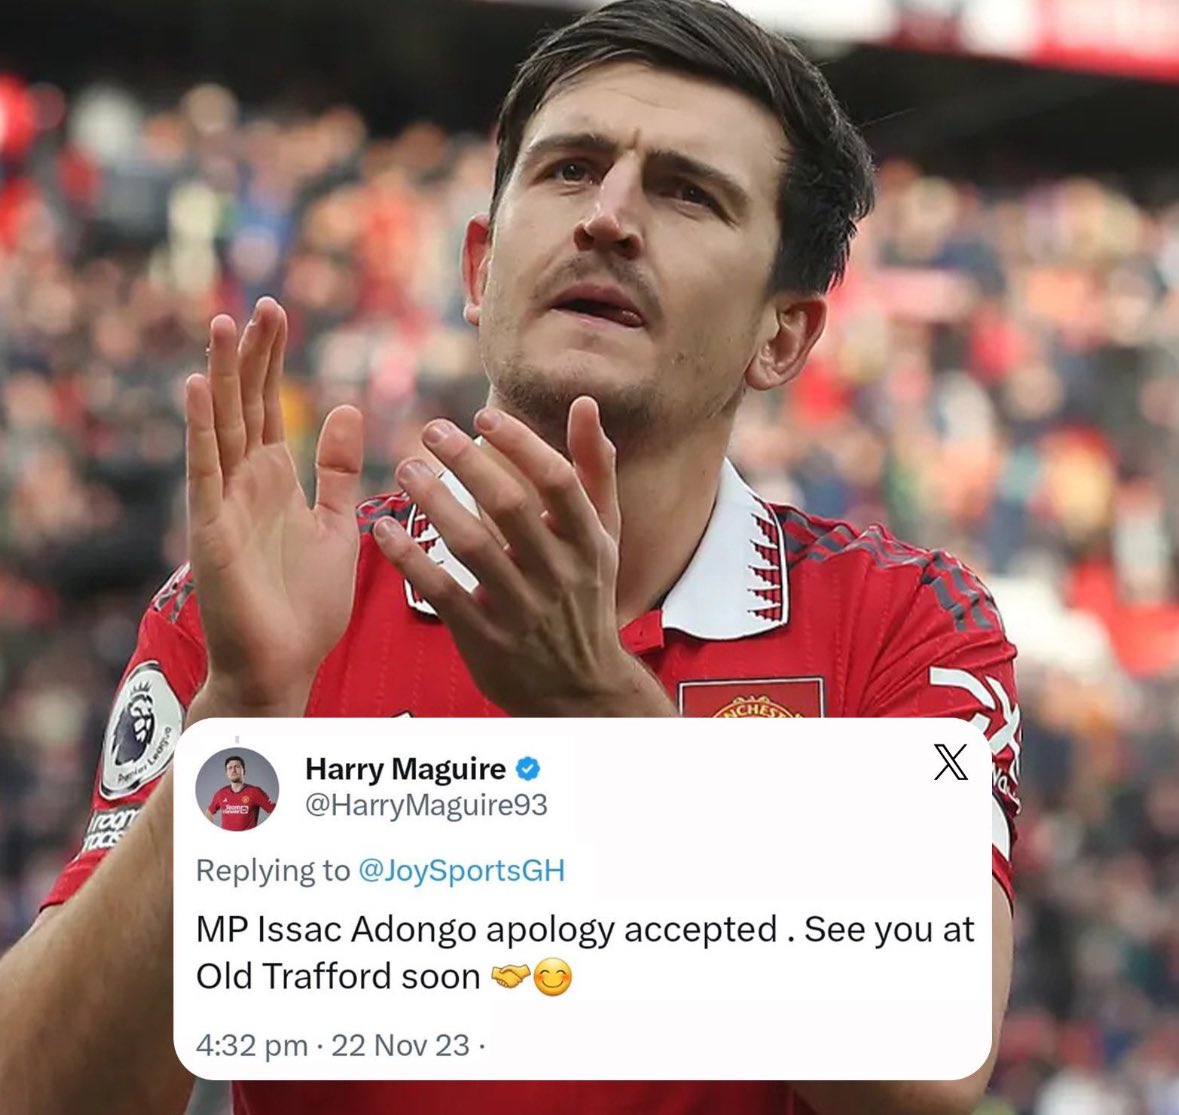 Harry Maguire Acknowledges Ghanaian MP’s Apology, Invites Him to Old Trafford